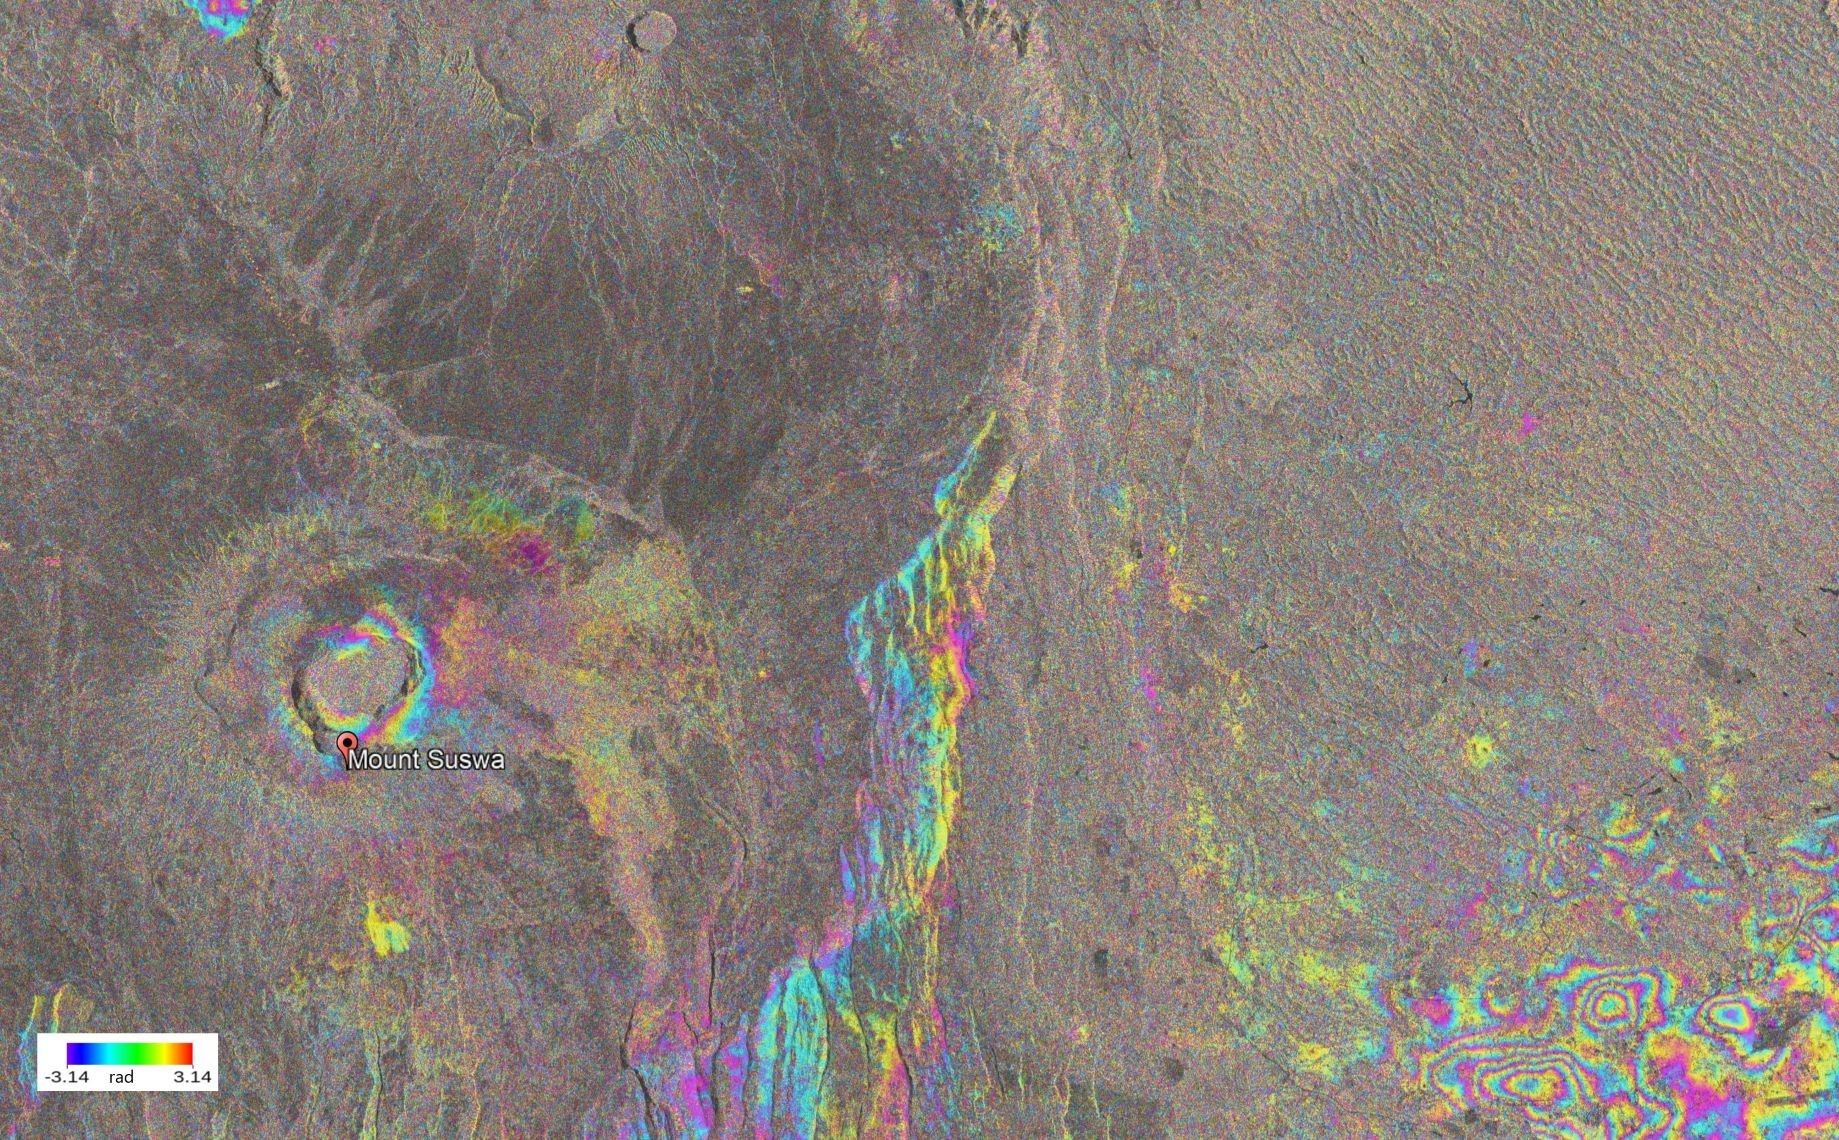 A wrapped Sentinel-1 interferogram for the period 2017-2020 showing significant deformation at Suswa Volcano associated with magma activity and at Nairobi caused by overexploitation of groundwater